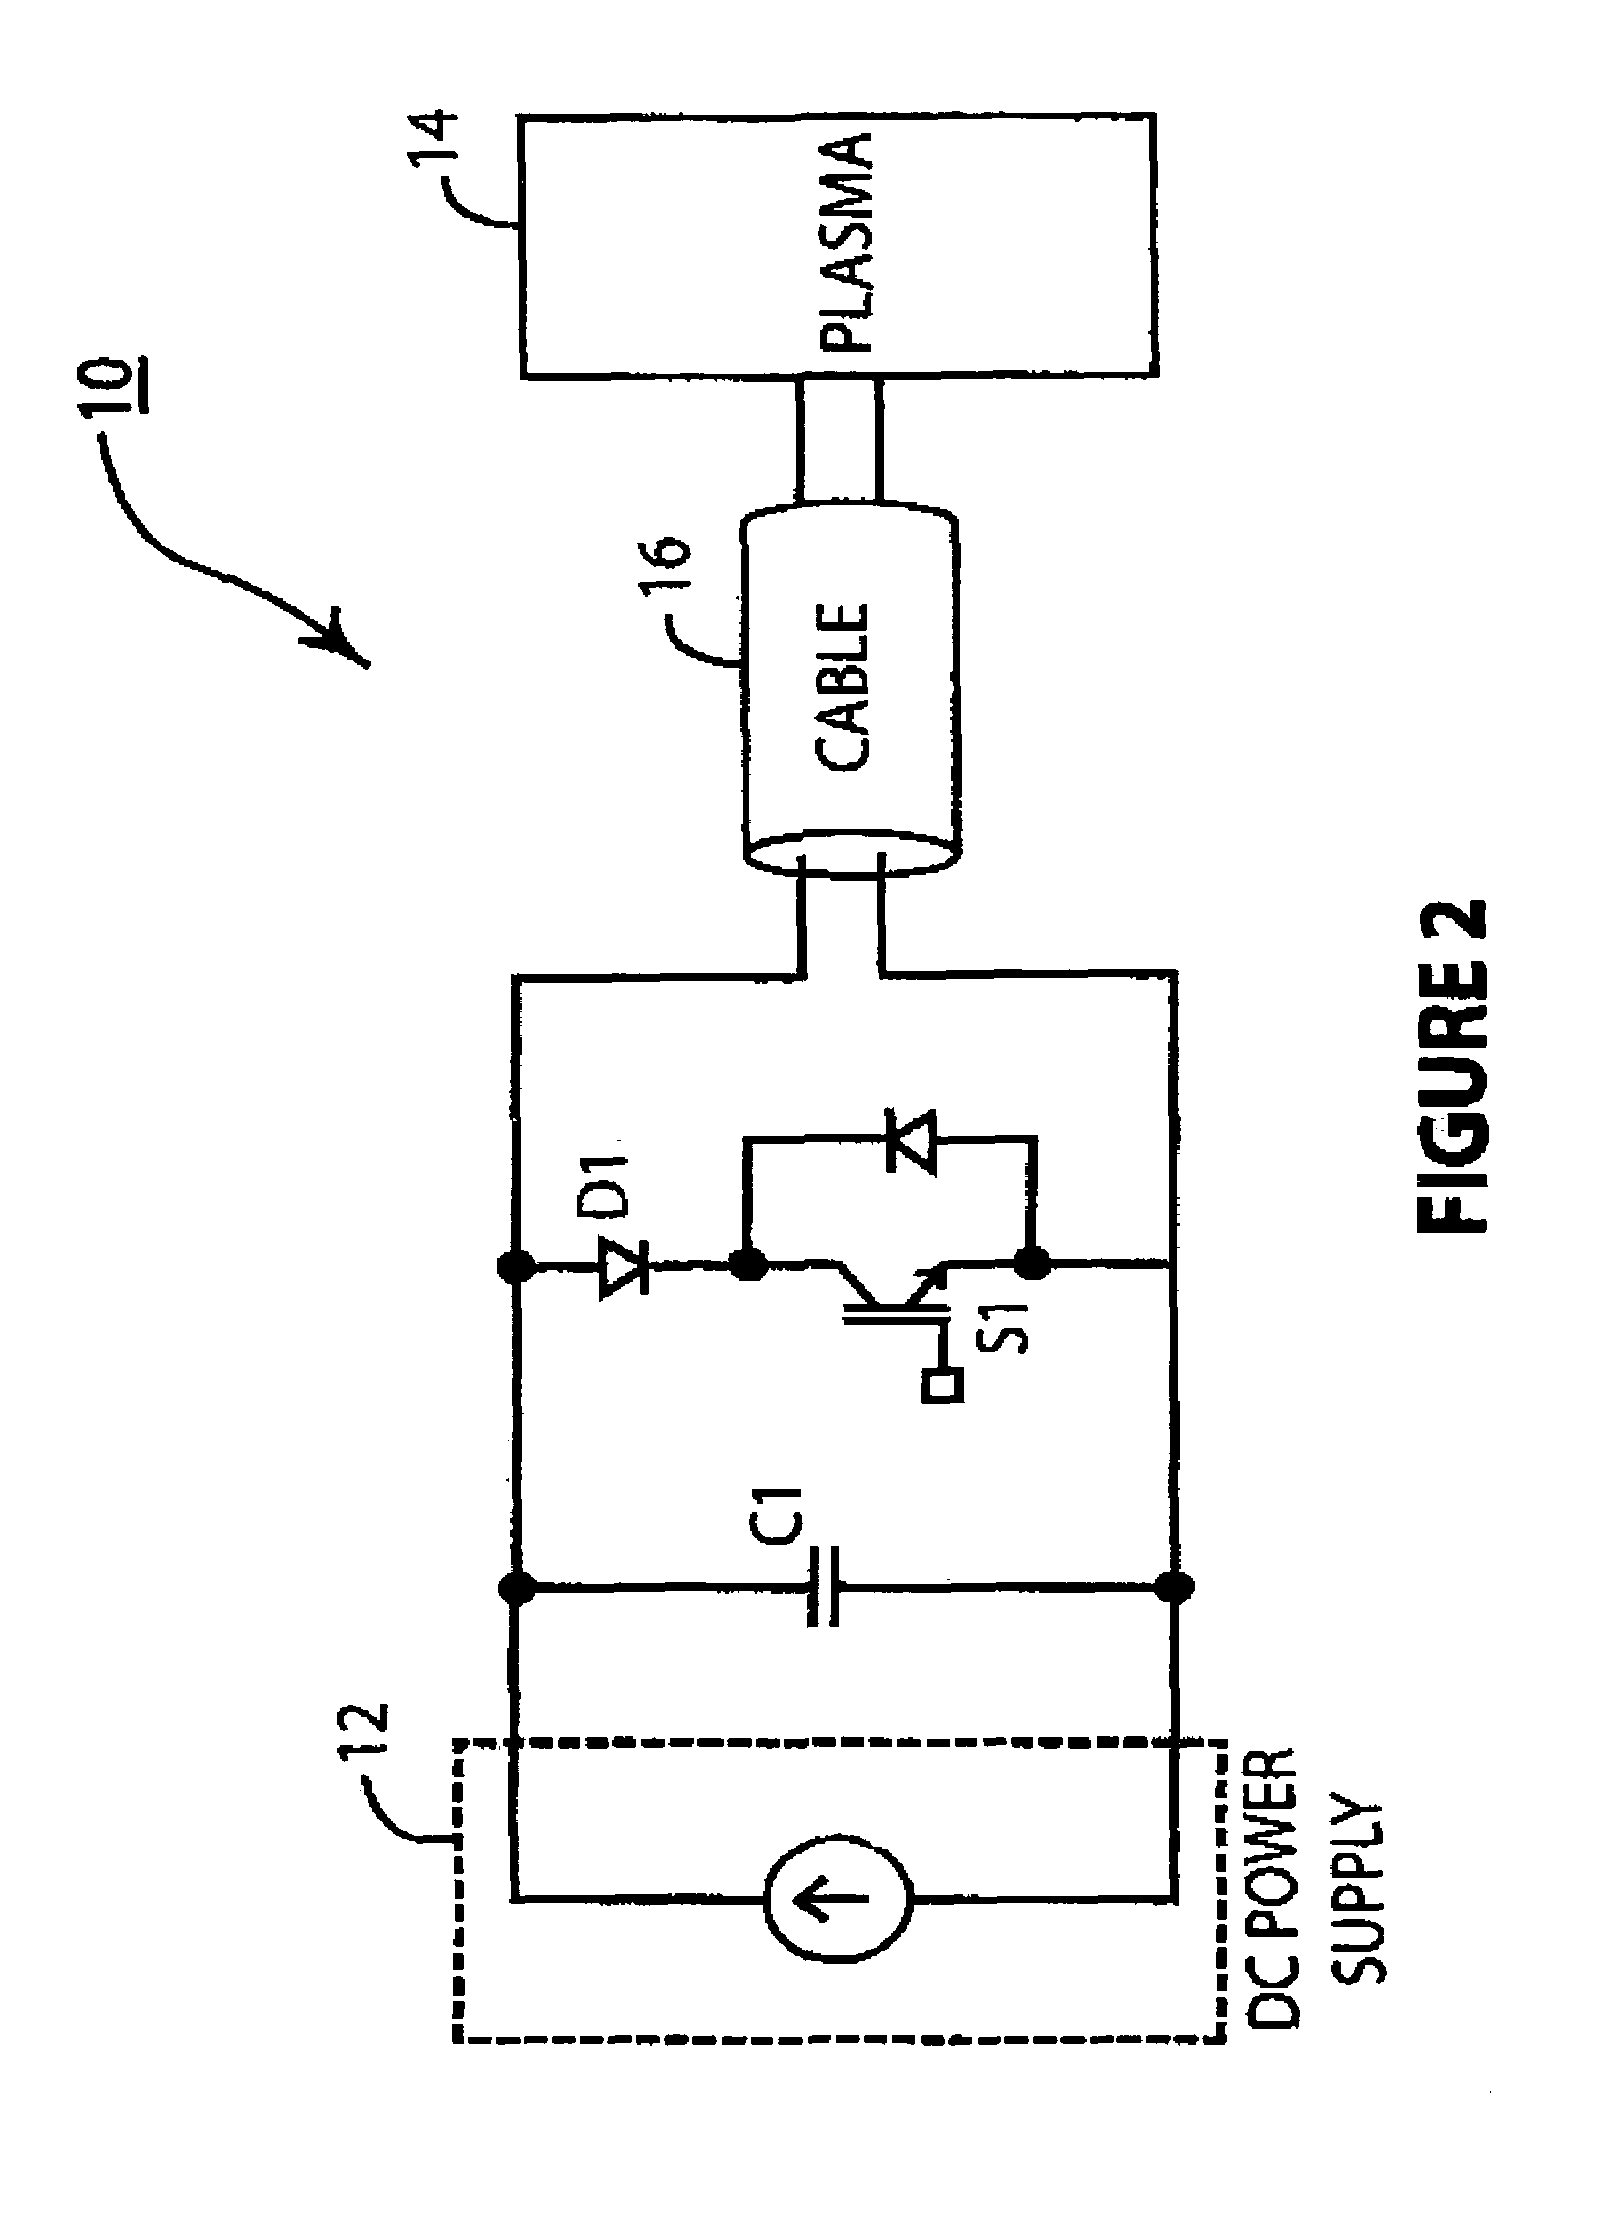 Apparatus and method for fast arc extinction with early shunting of arc current in plasma